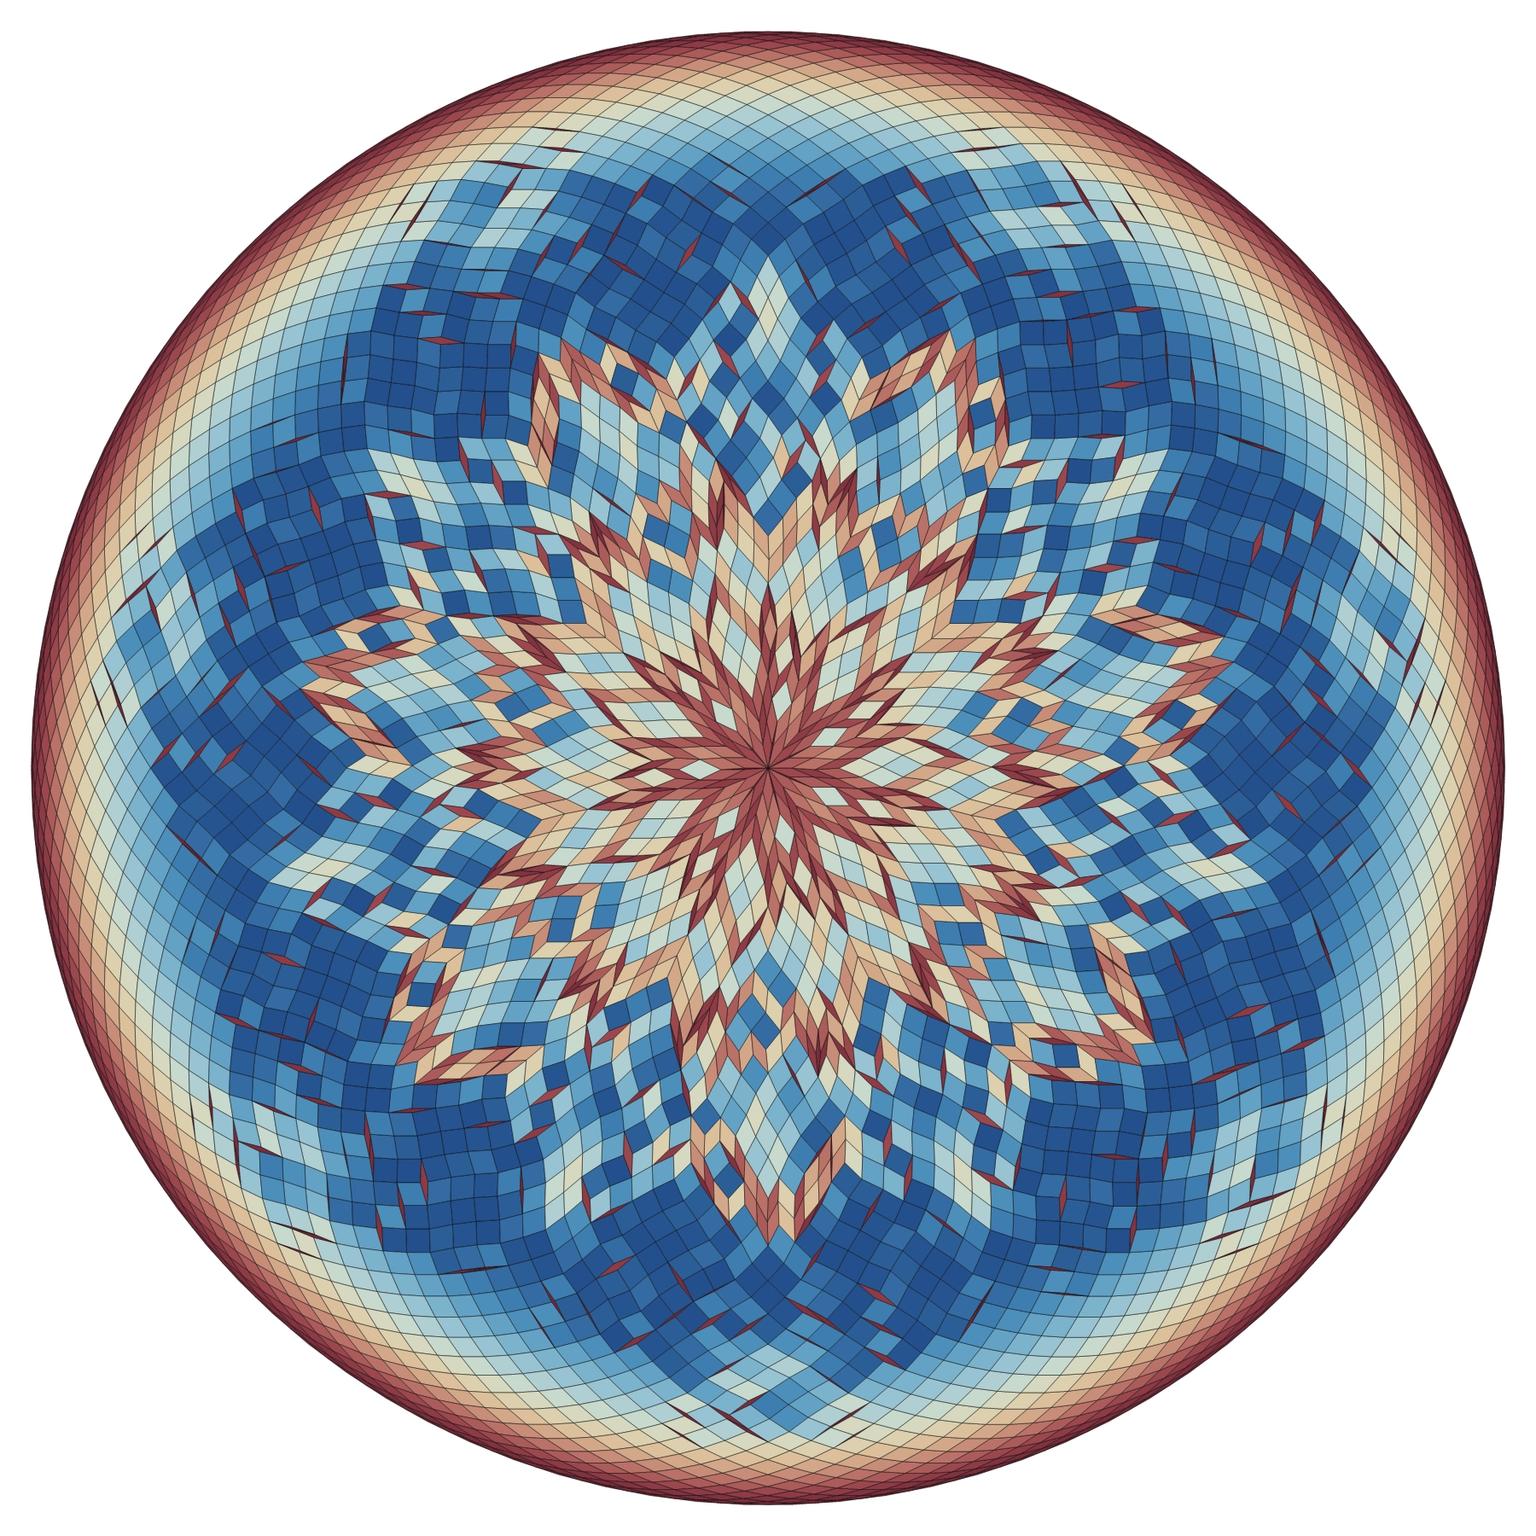 Image for entry 'Radially Repetitive Randomized Rhombic Rosette'